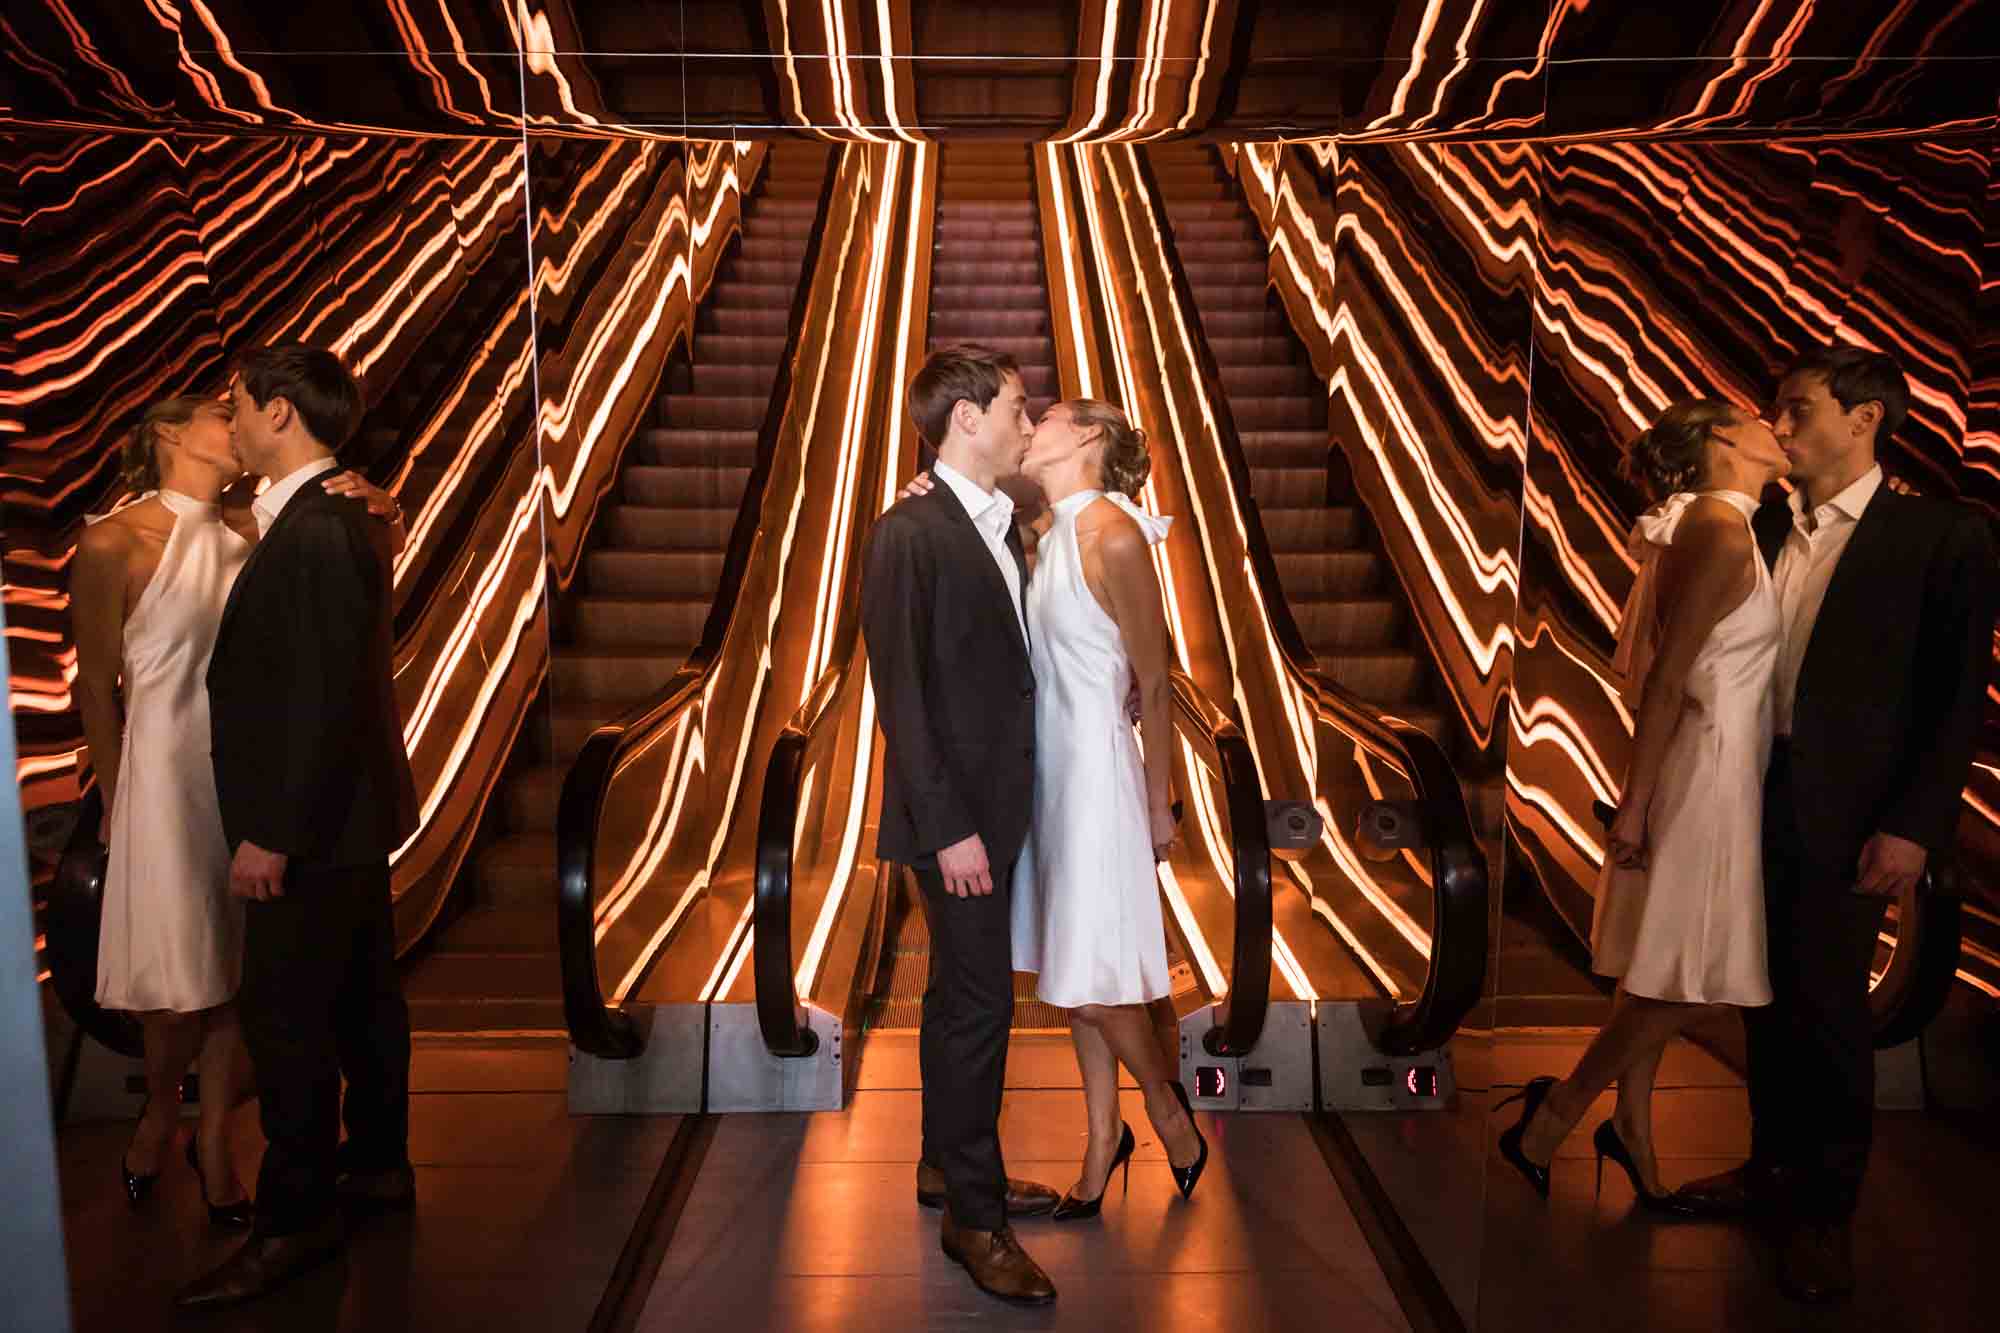 Couple kissing in front of neon-lit escalator for an article on how to plan a hotel room wedding ceremony